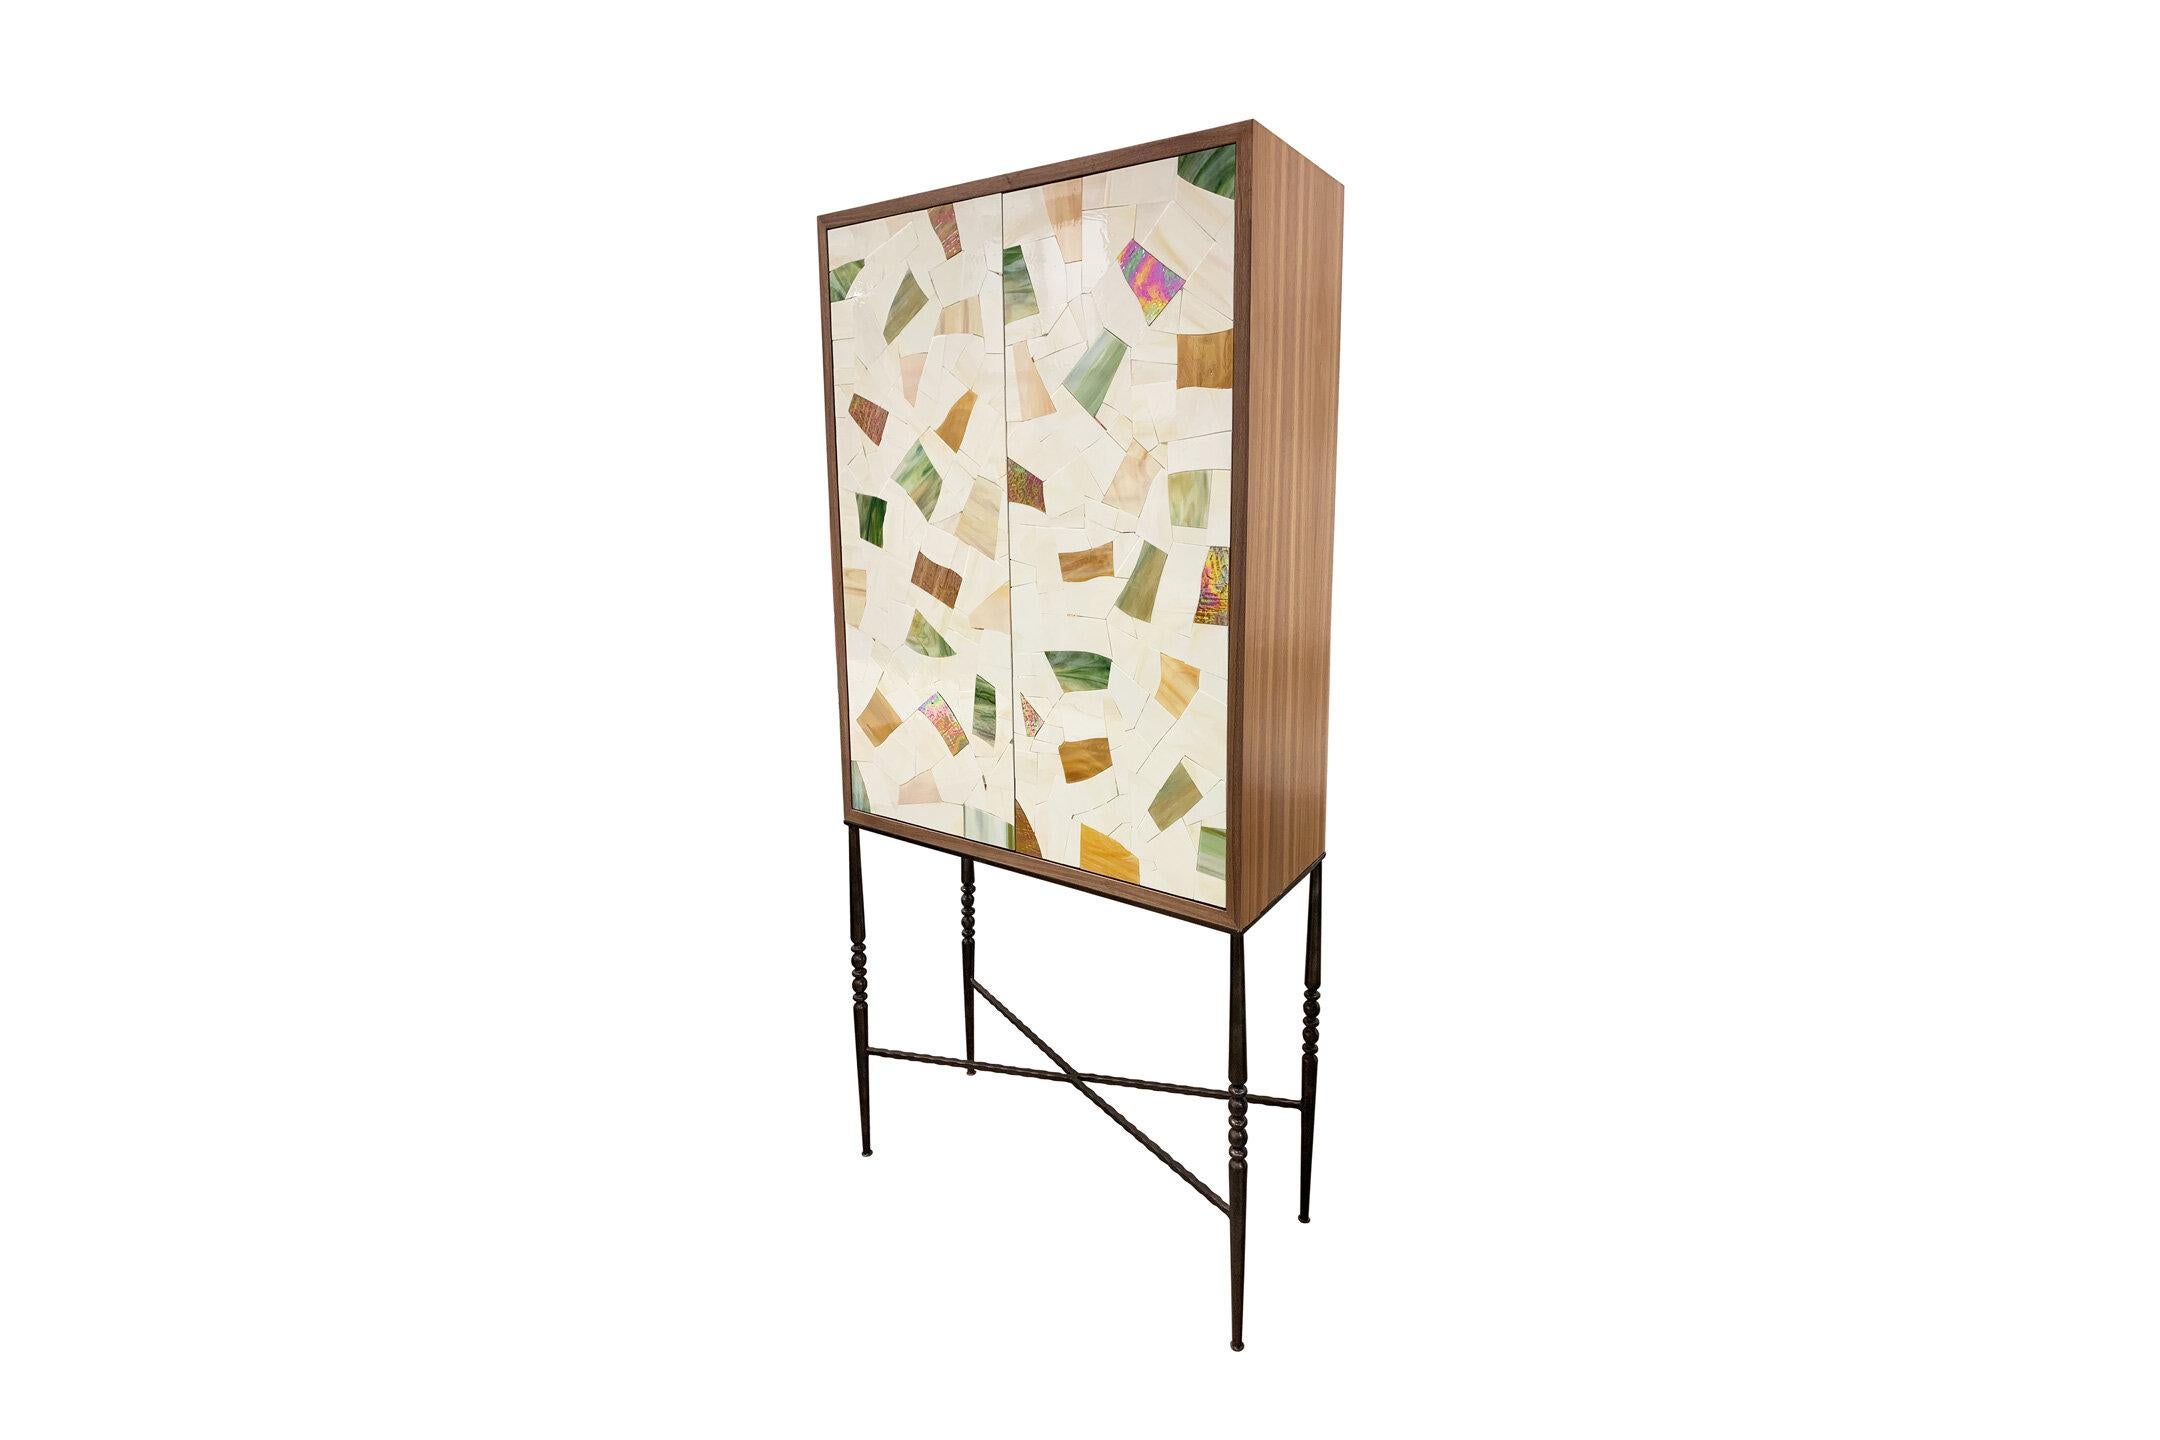 The Milano bar cabinet by Ercole Home has a 2-door front, with a natural walnut finish on oak. Handcut glass mosaics in light ivory vetrazzo mix glass mosaic decorate the surface in a continuous Vetrazzo pattern.
Custom sizes and finishes are